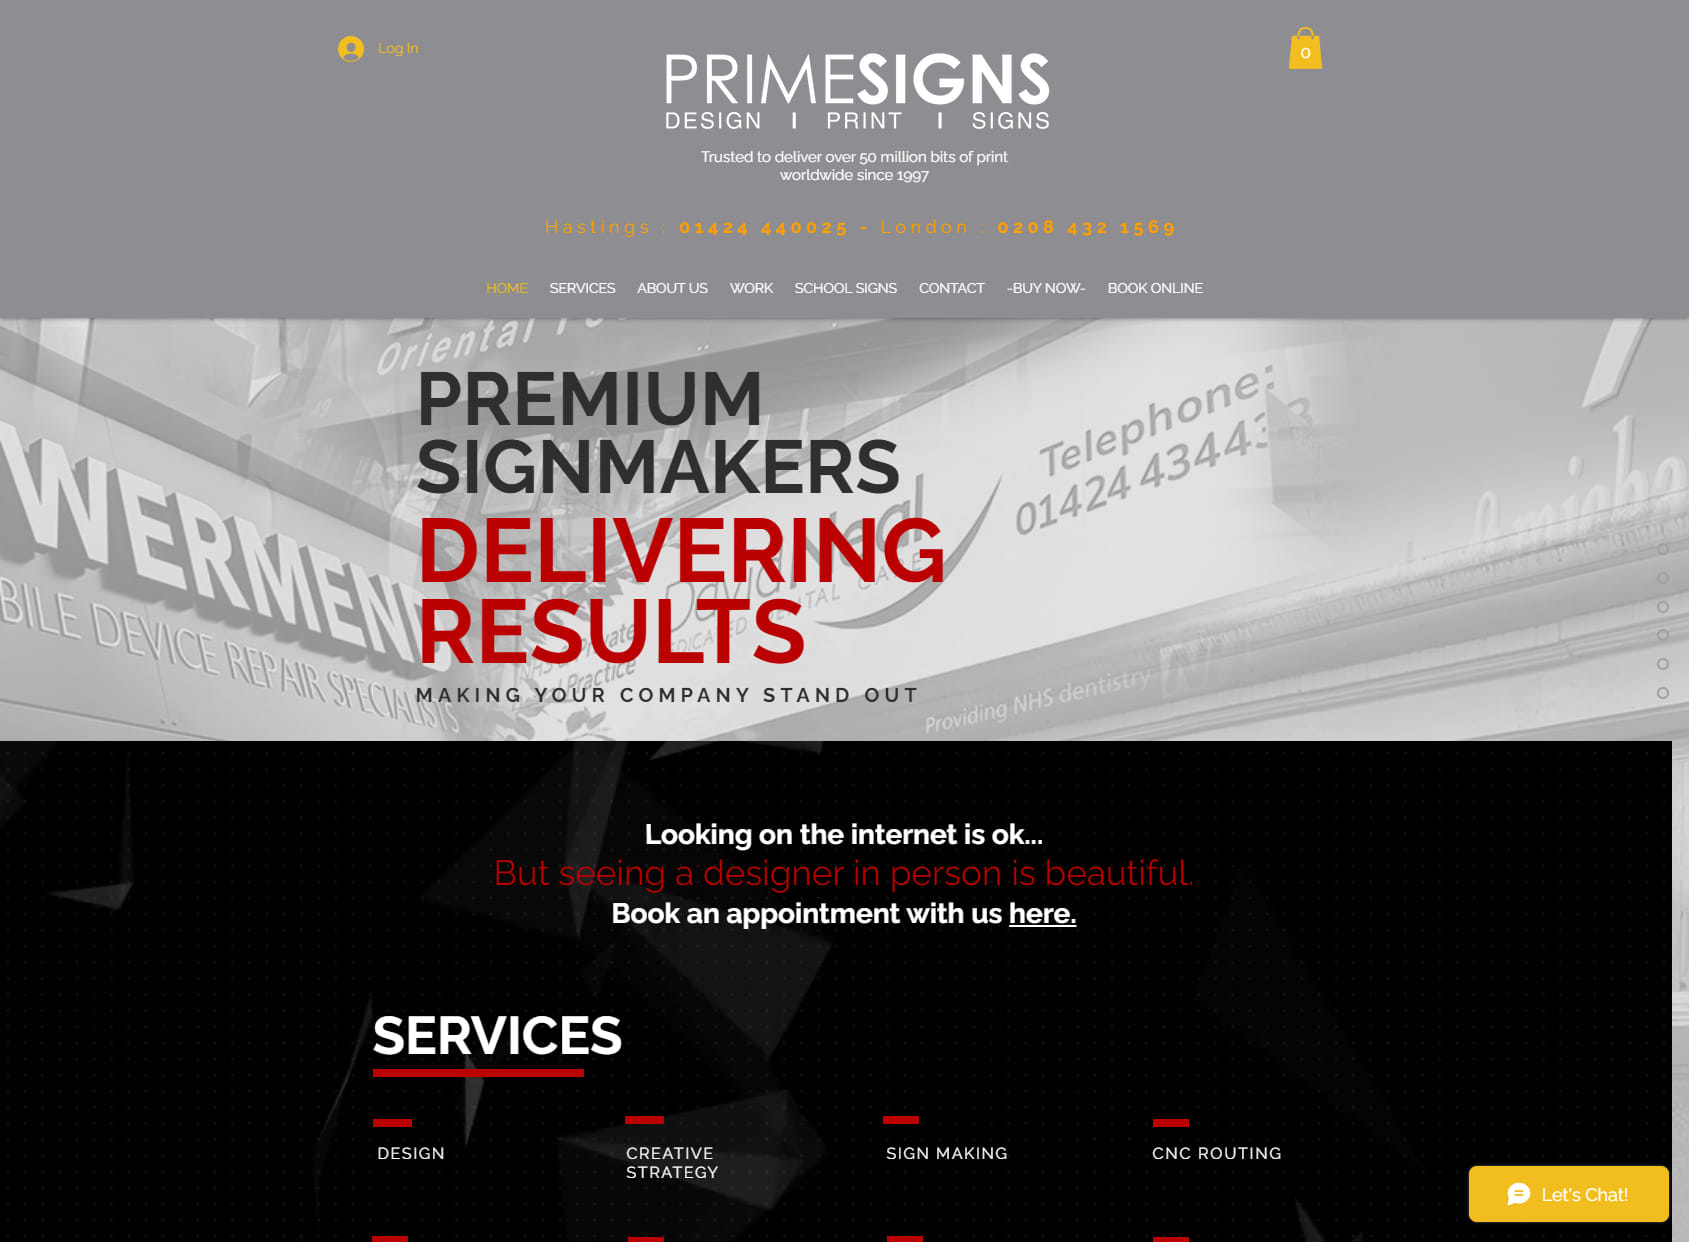 Primesigns - Premium Designers, Sign Makers and Printers. Call us for excellent media related advice.